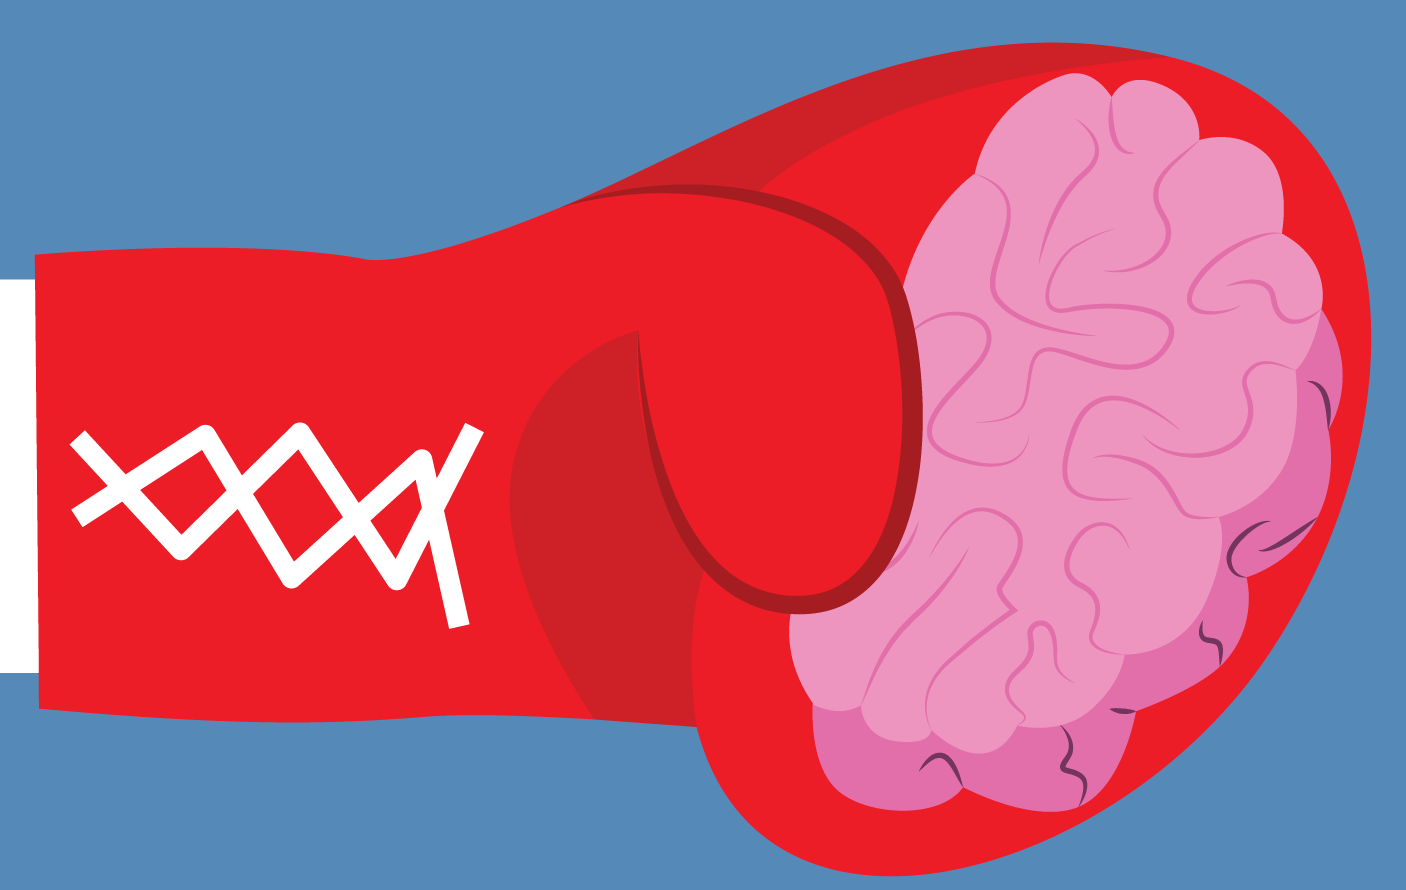 Illustration of a brain inside a boxing glove - stock image